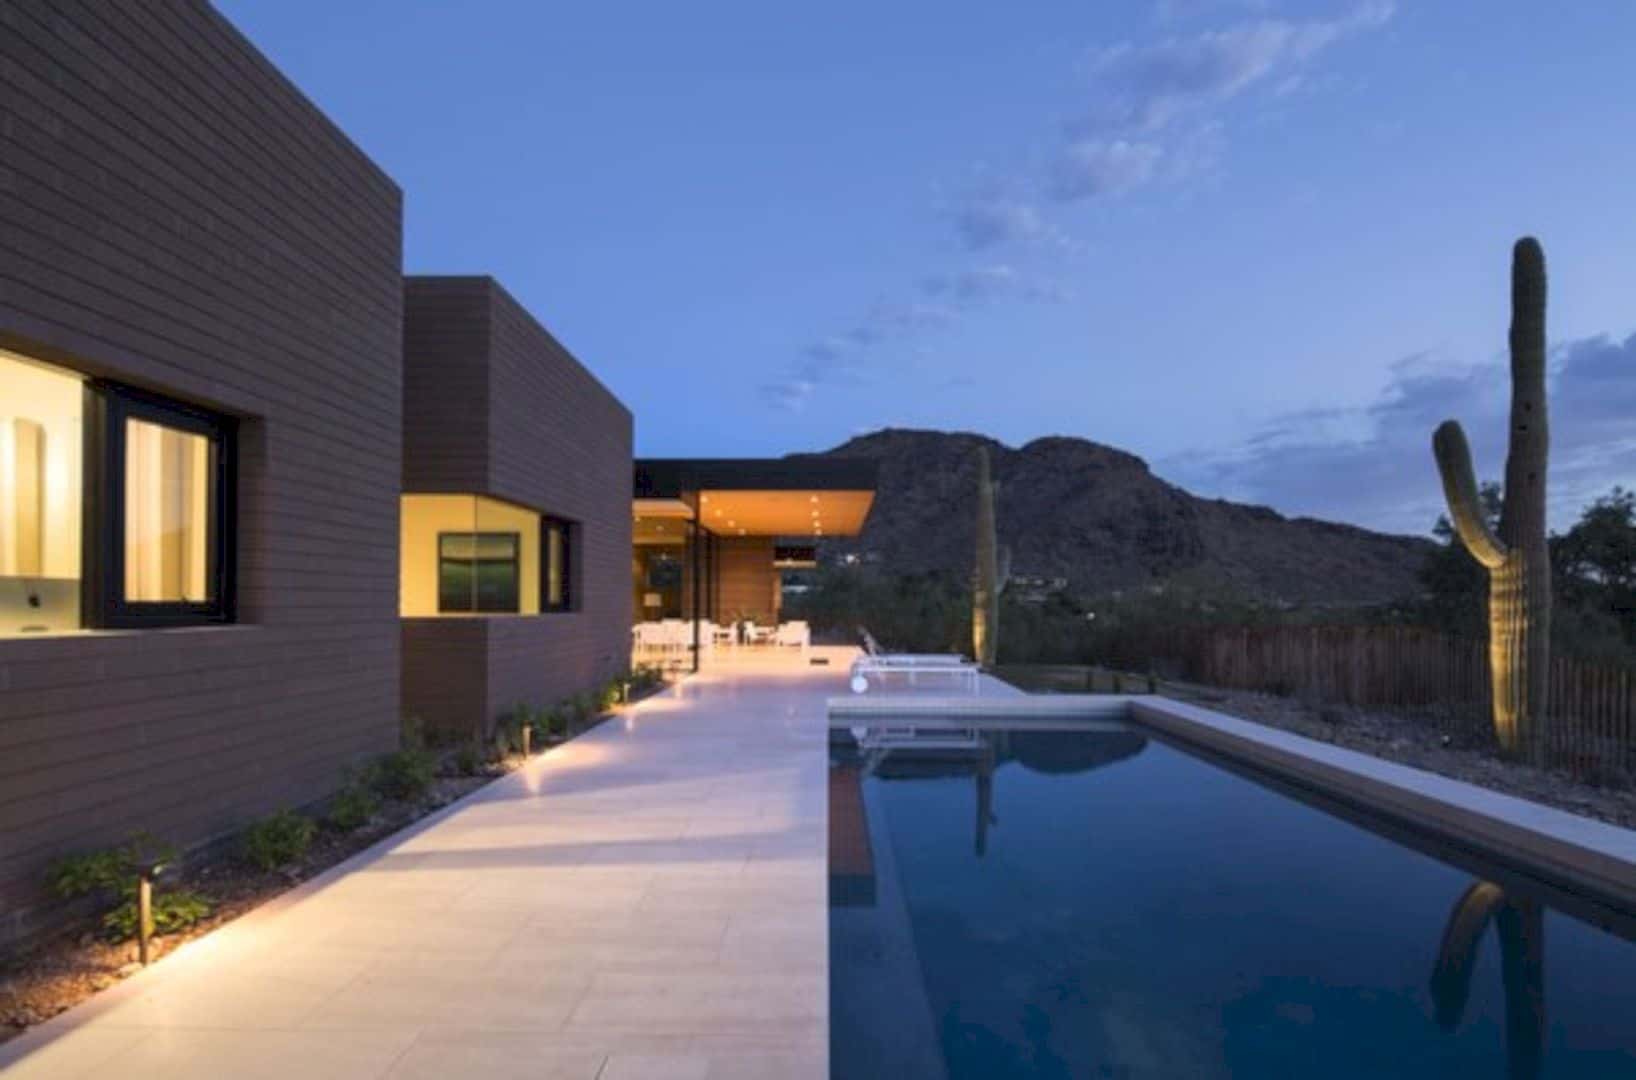 The Rammed Earth Modern Residence A Modest Yet Sophisticated Residence Dominated By Humble Materials 22